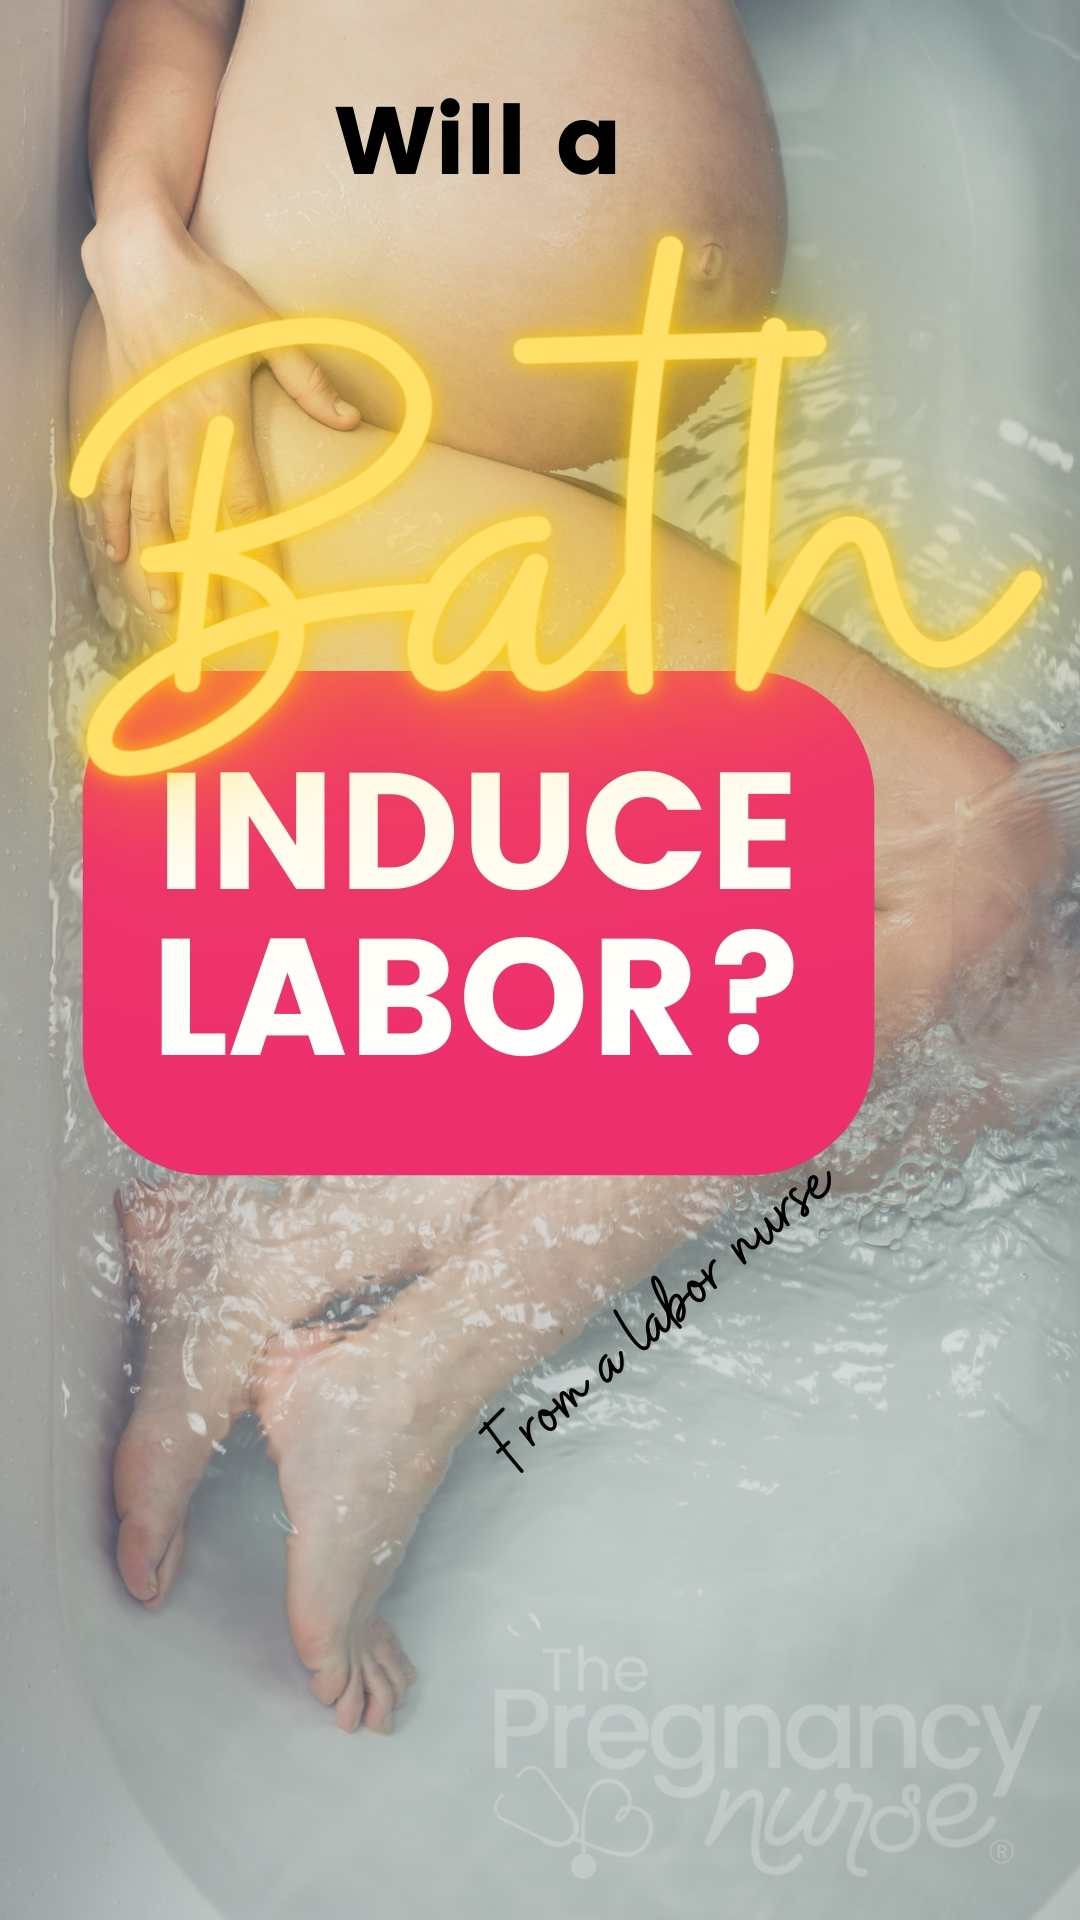 At 39 weeks pregnant, many couples are wondering if taking a warm bath can help start labor. This experienced labor nurse will help clear up any confusion and let you know what to expect when trying this method.